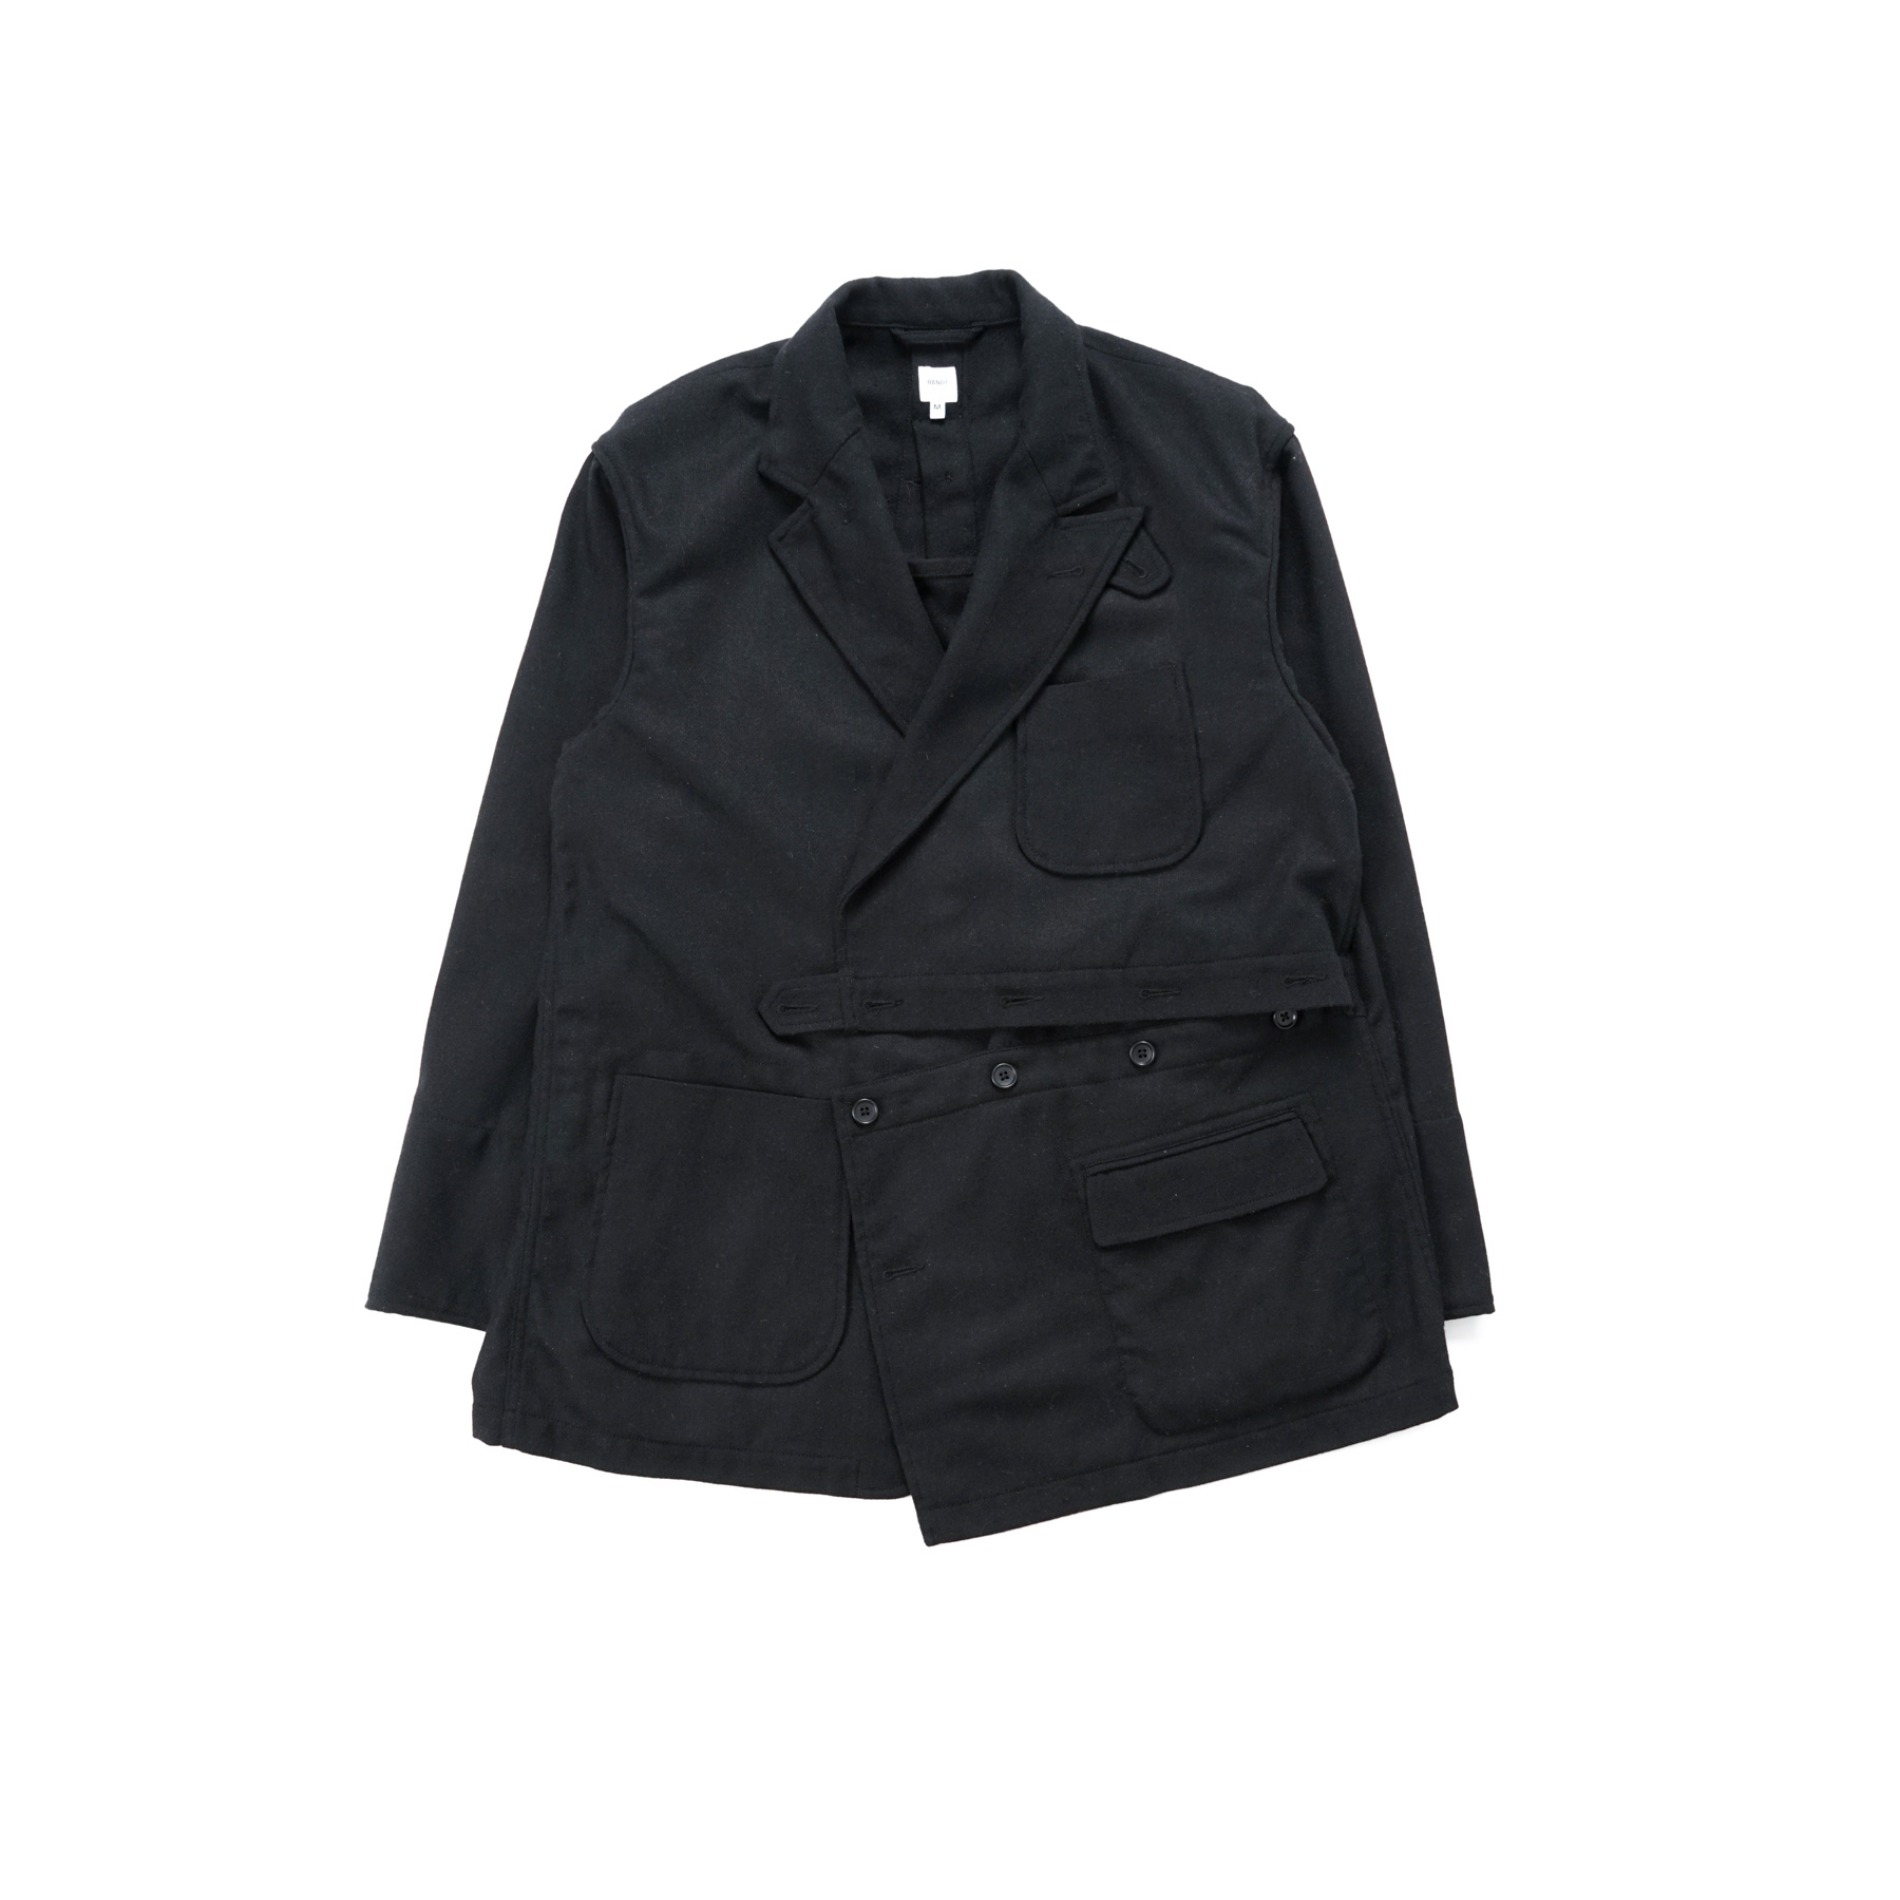 RANDT RT JACKET BLACK SOLID POLY WOOL FLANNEL